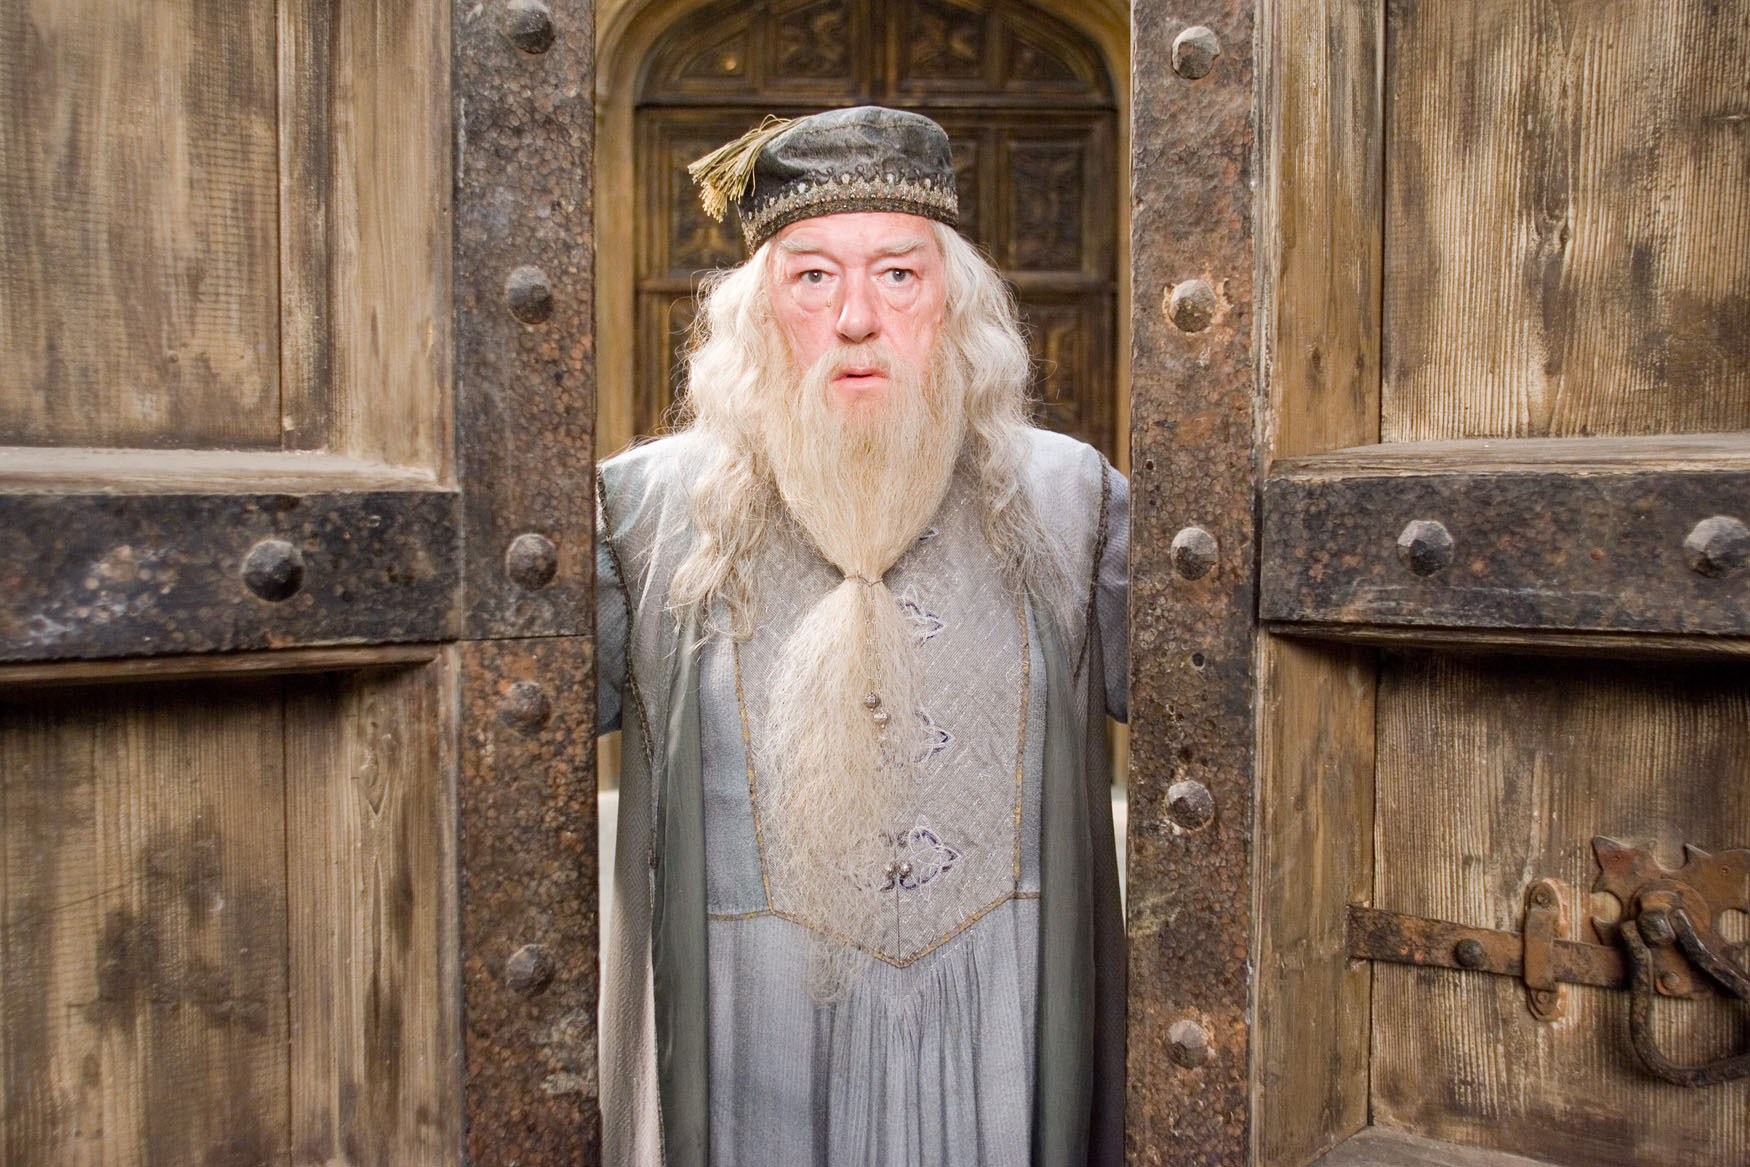 PHOTO: Michael Gambon as Albus Dumbledore in Warner Bros. Pictures' "Harry Potter and the Order of the Phoenix."